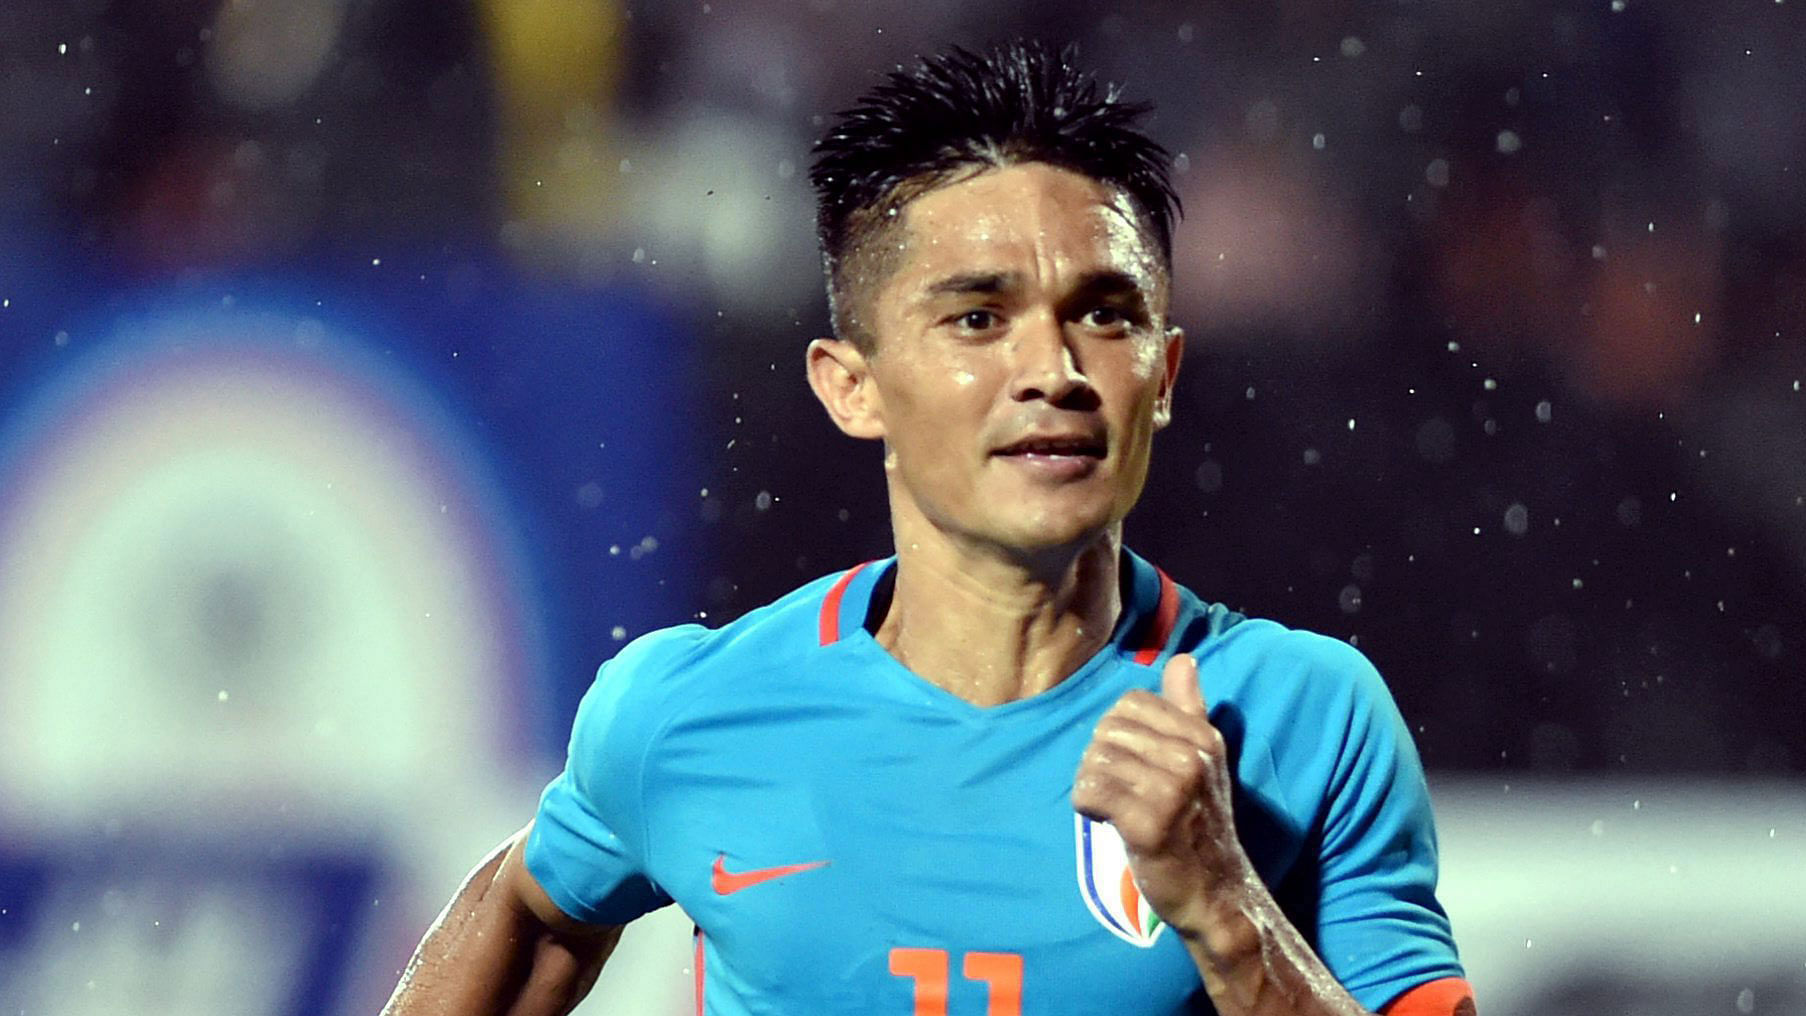 Indian football team captain Sunil Chhetri rated Lionel Messi as the greatest player of all time.